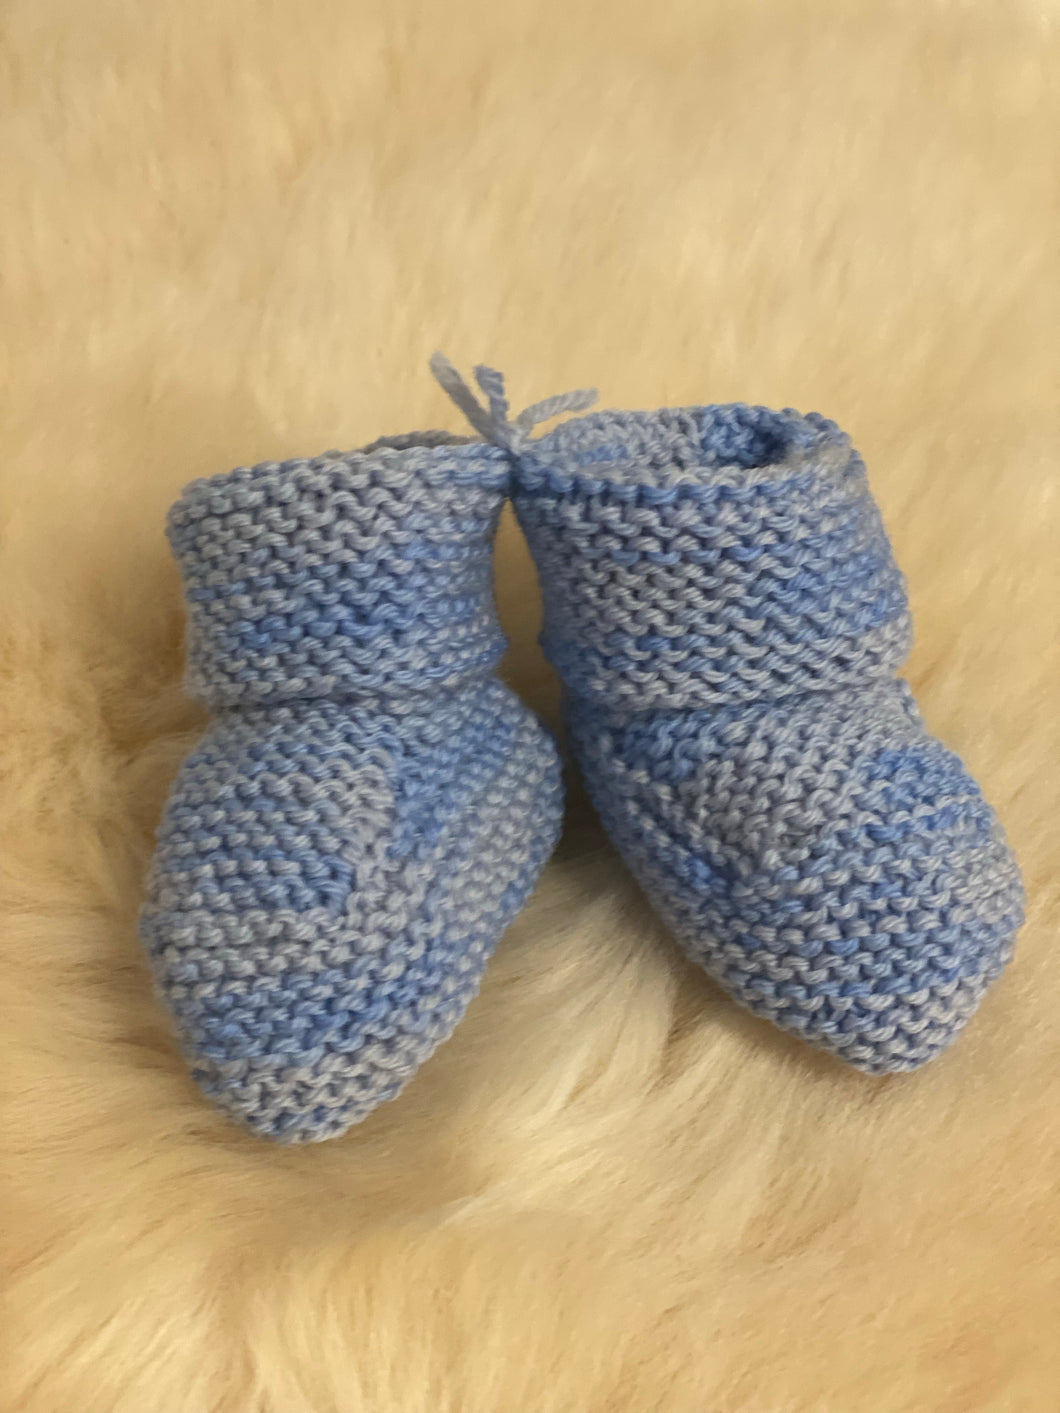 Knitted Booties & Beanies - 0-3 months - Choose your colour